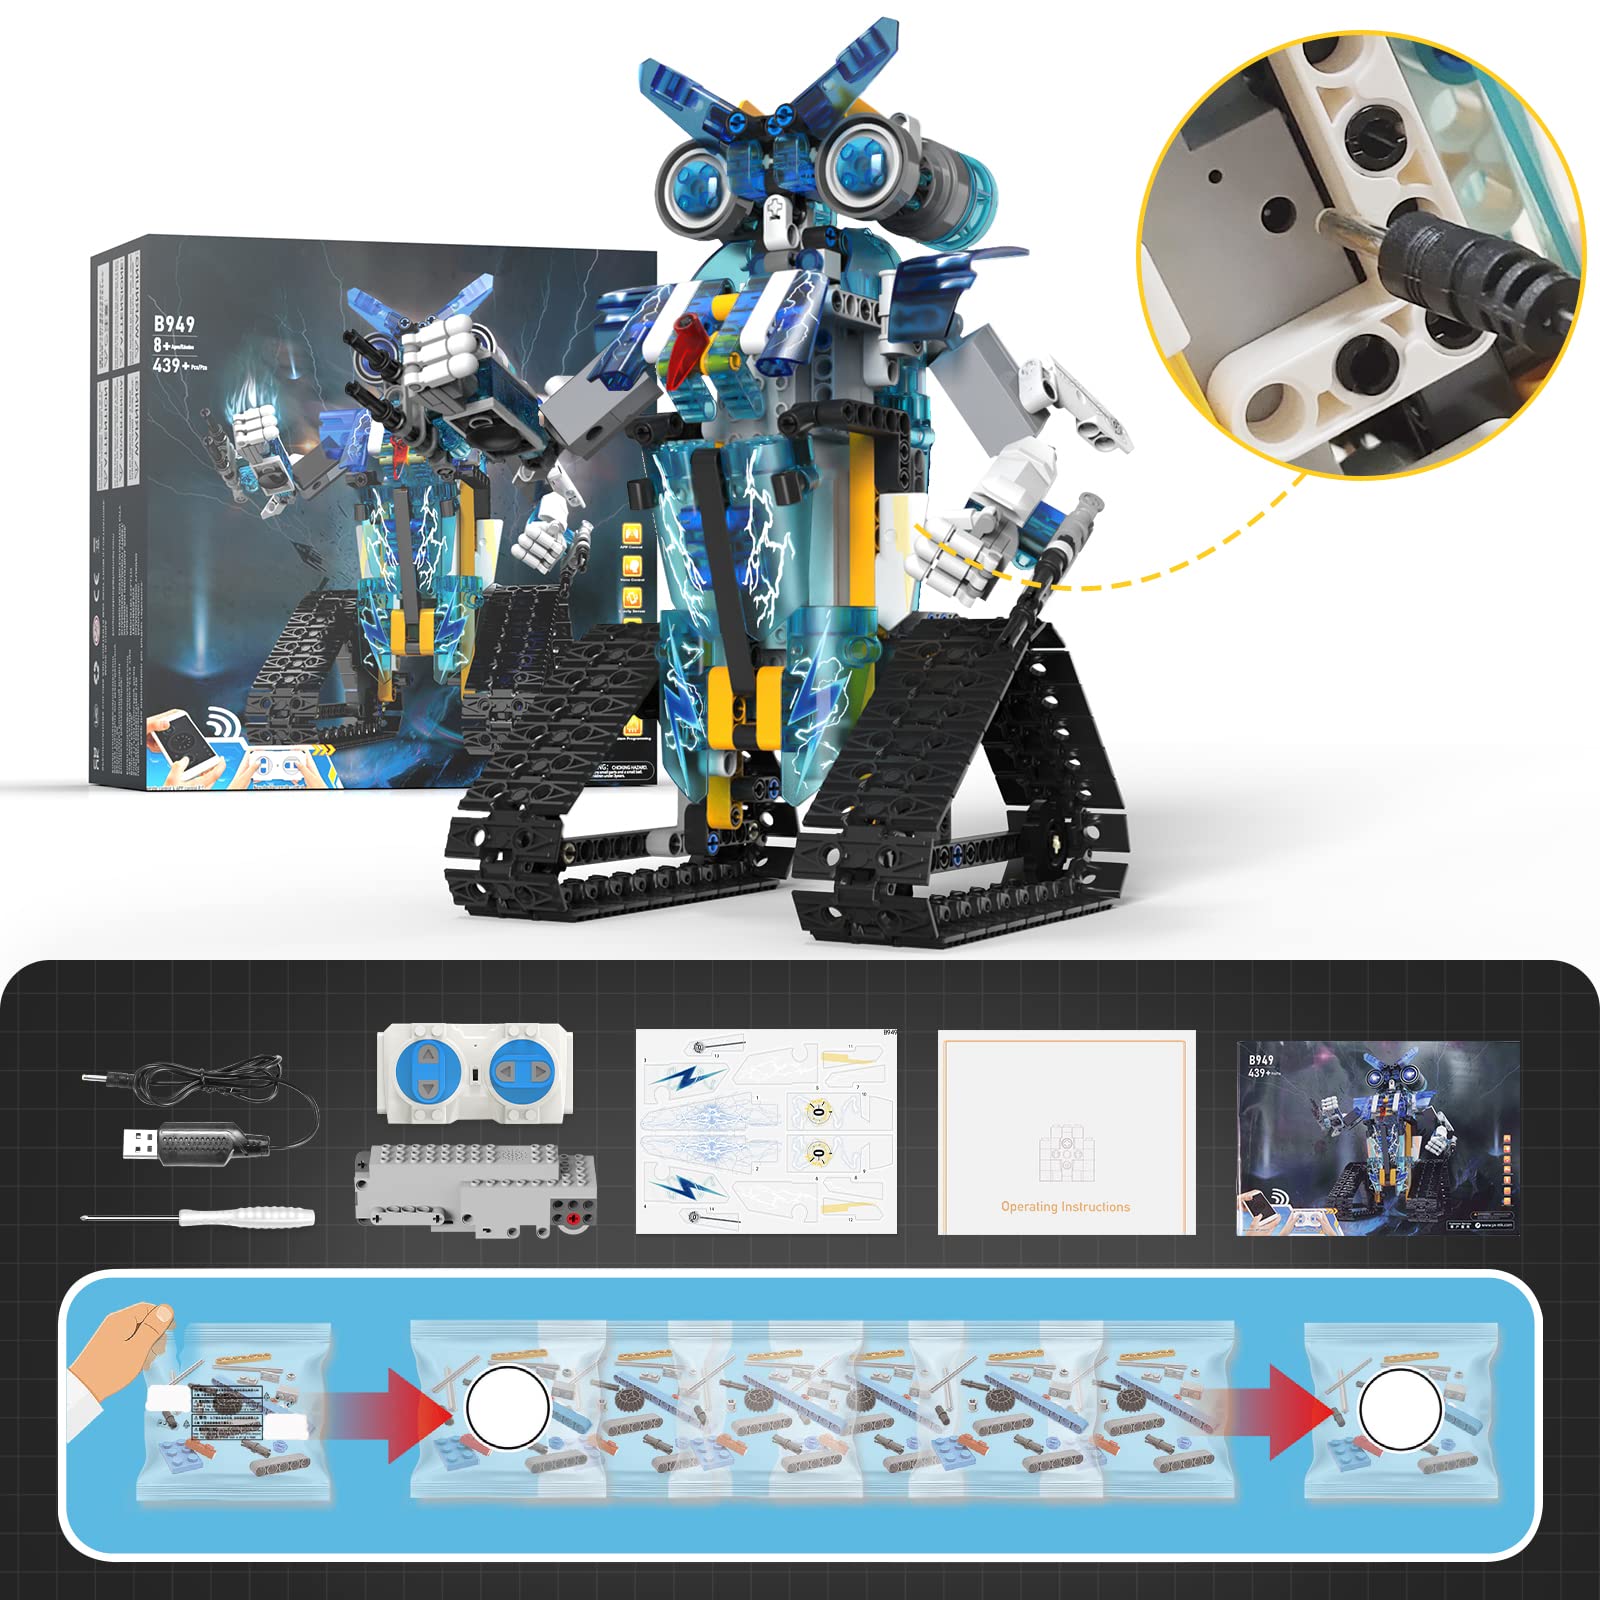 HAKPNEW Remote Control Building Blocks,Programmable Building Robotics Kit with APP Kids Robot Toys for Boys 6-12 Years Old